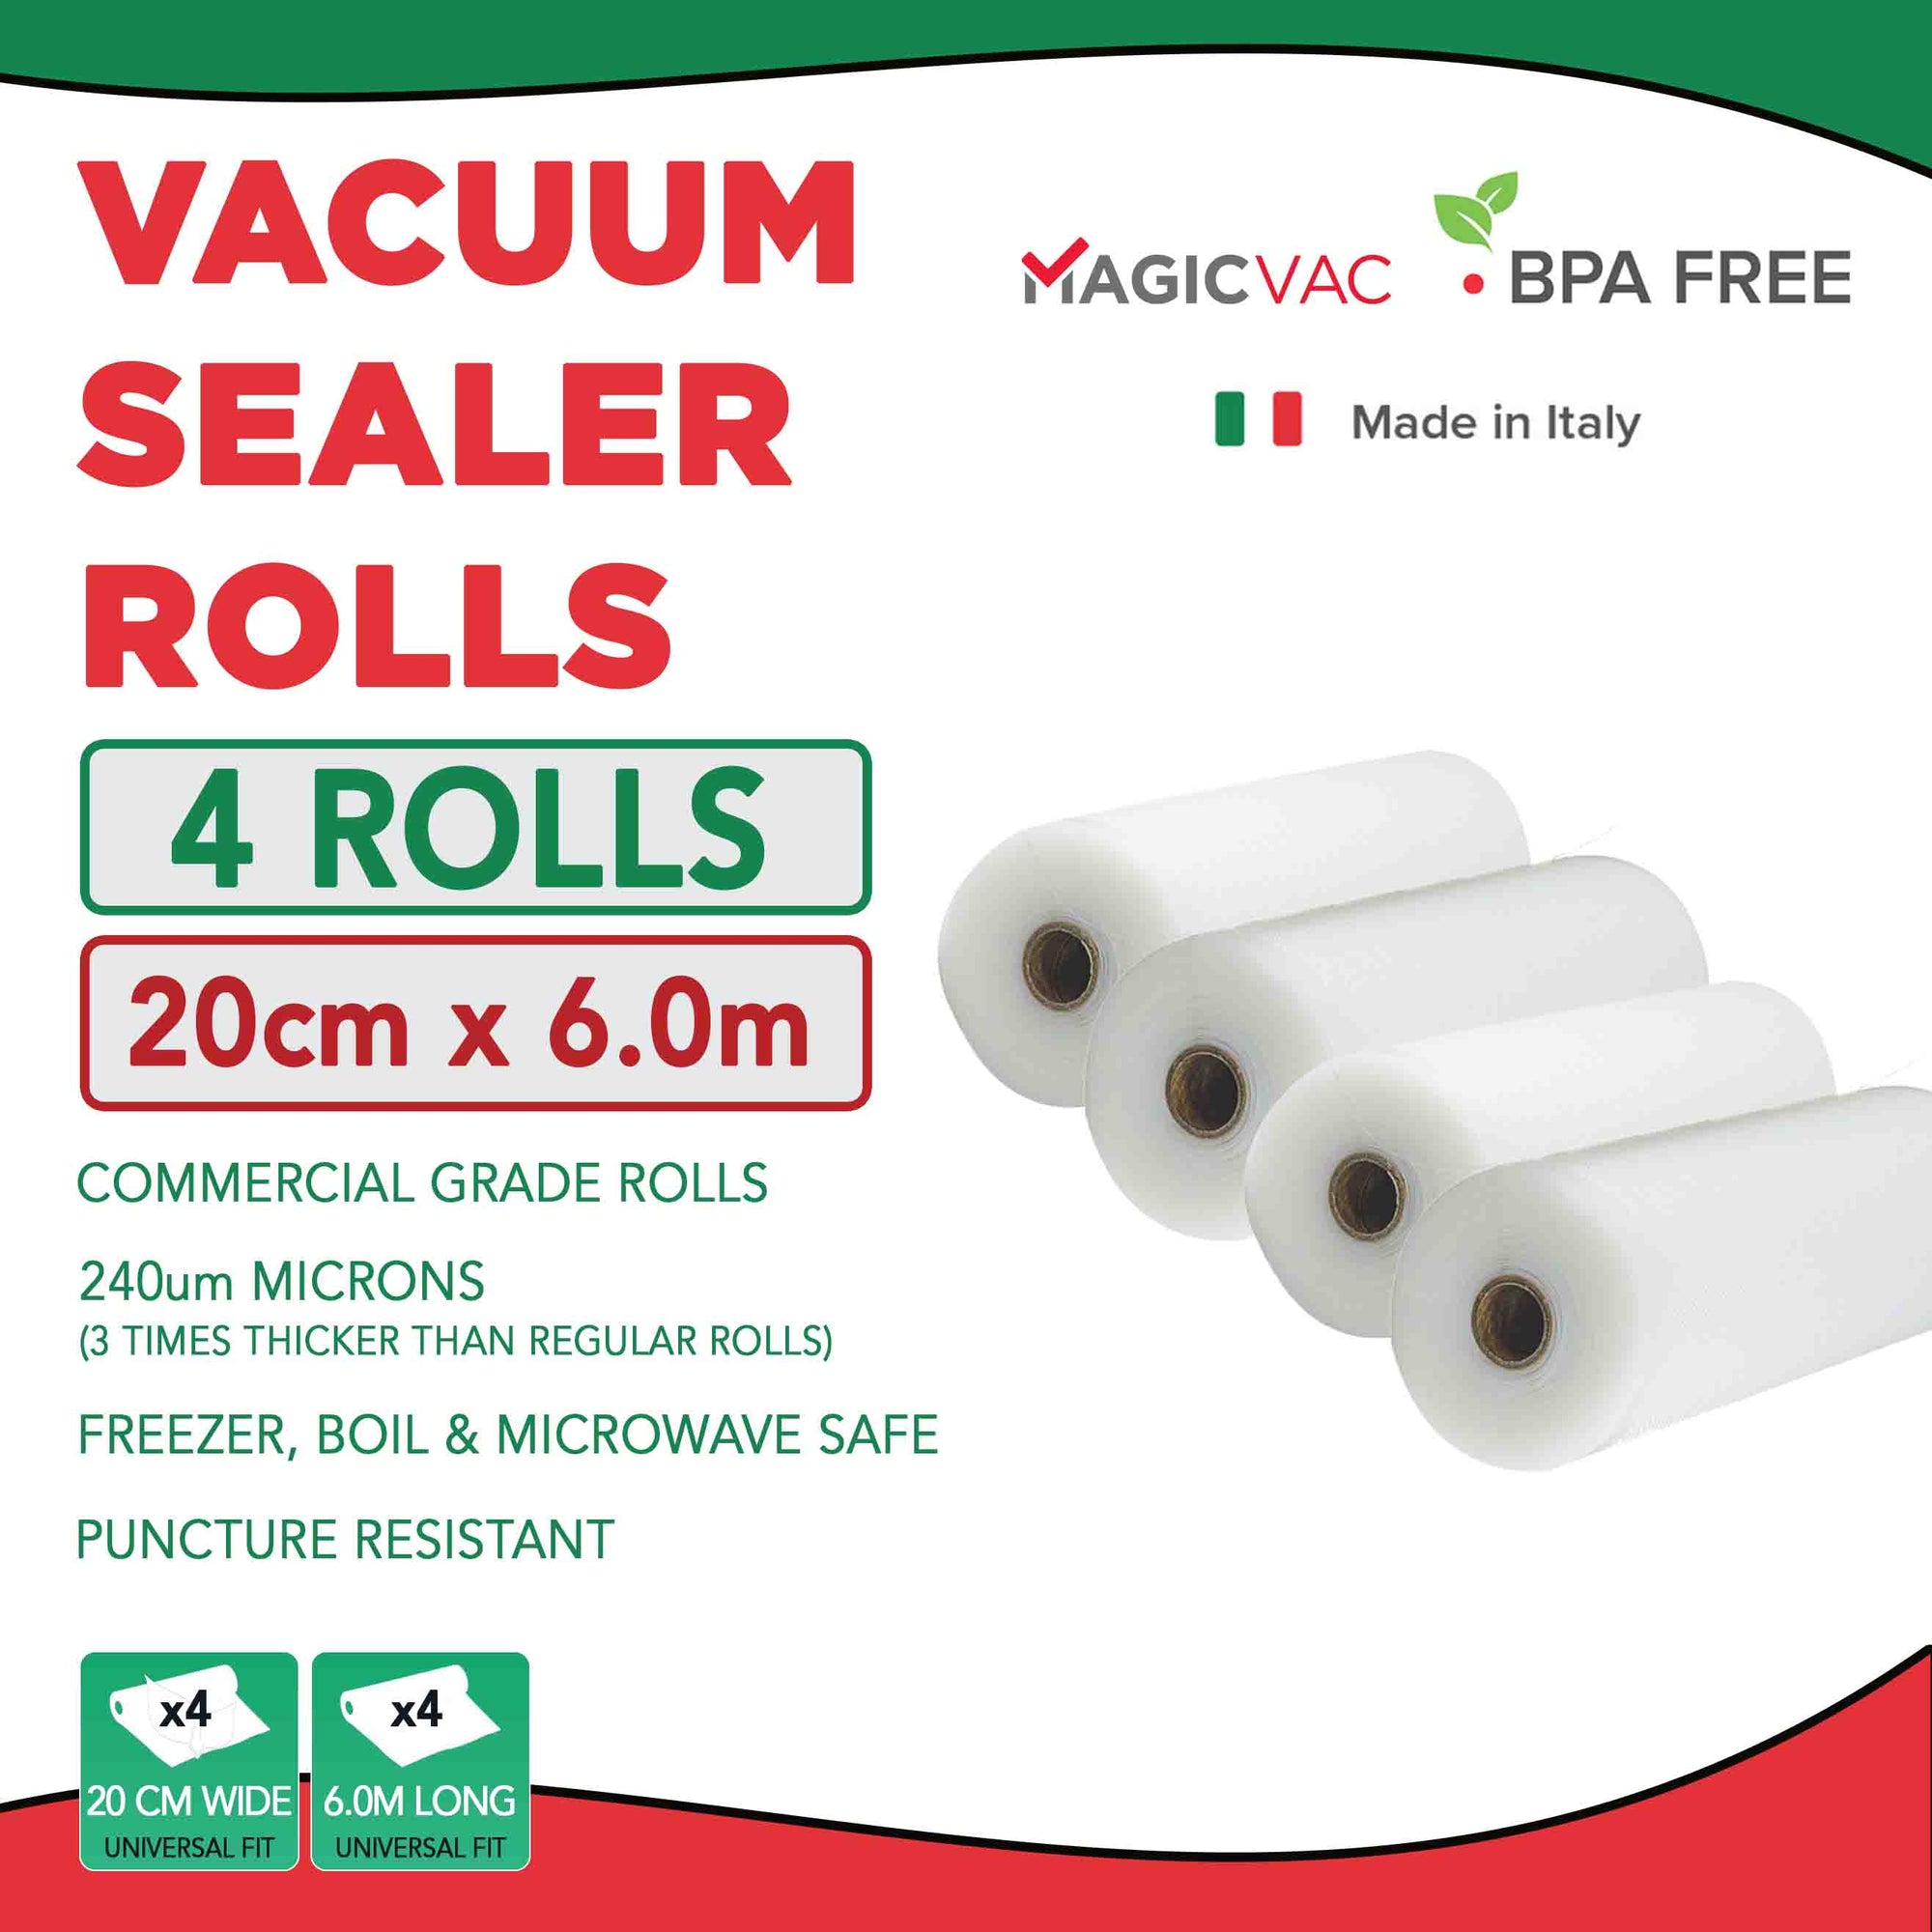 Magic Vac Vacuum Sealer Rolls Made in Italy Thick 240 microns 4 Pack